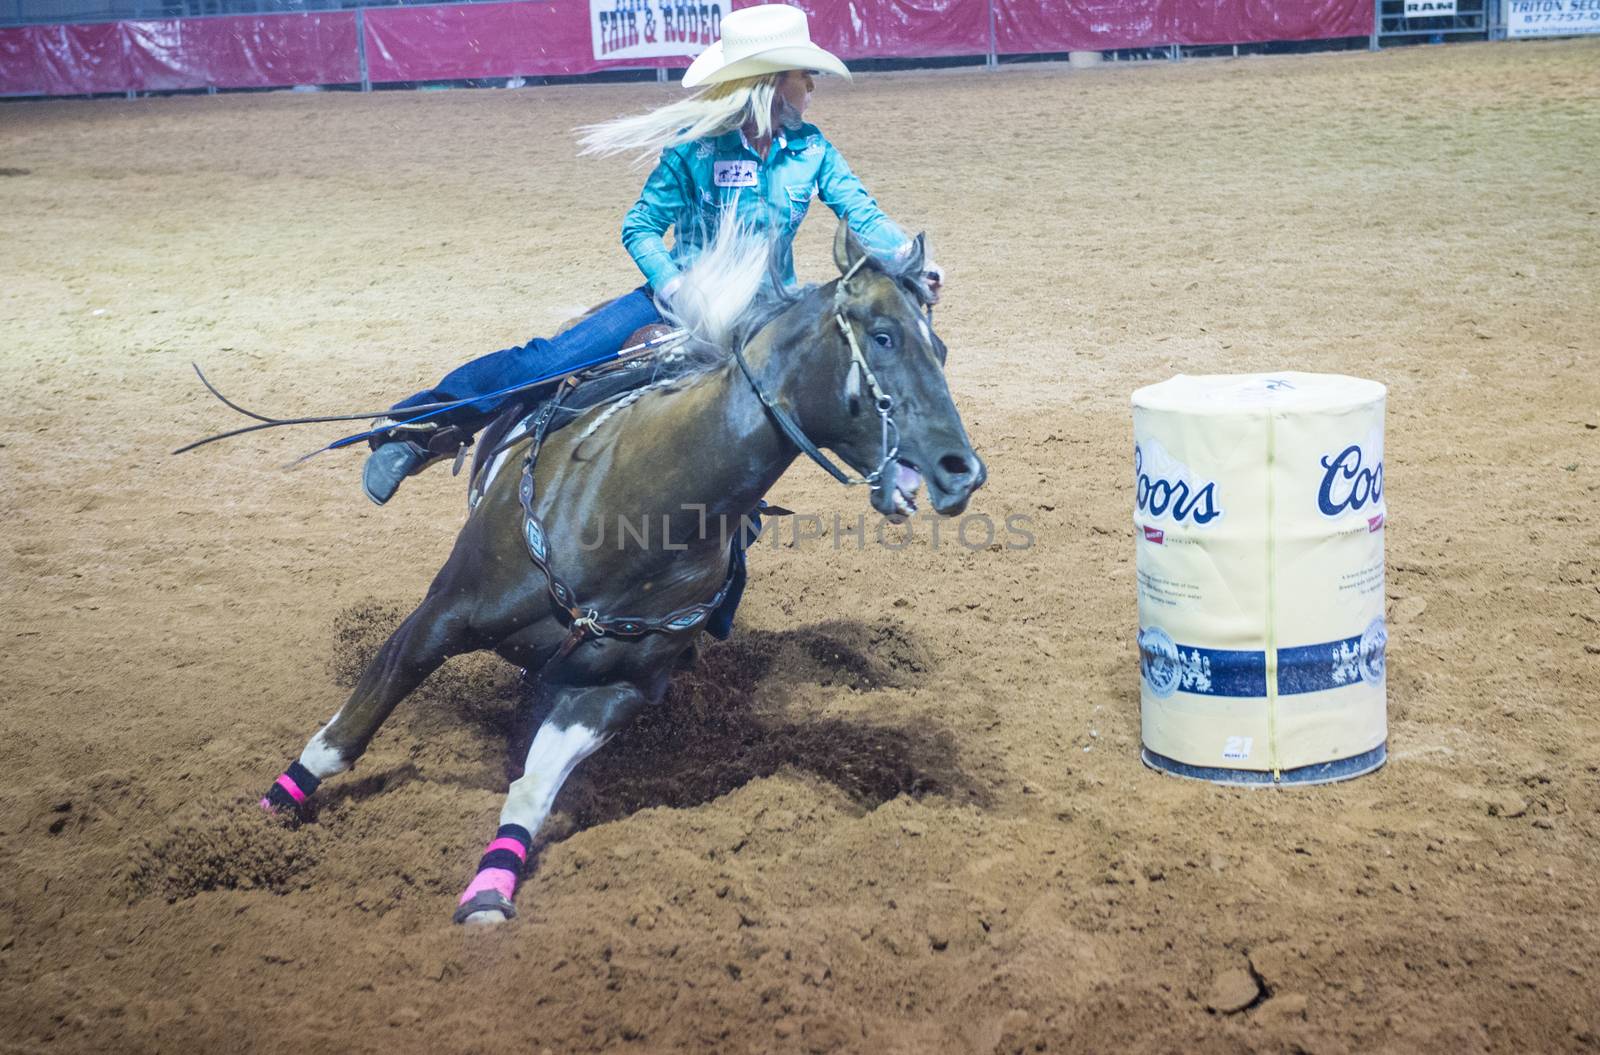 LOGANDALE , NEVADA - APRIL 10 : Cowgirl Participating in a Barrel racing competition in the Clark County Fair and Rodeo a Professional Rodeo held in Logandale Nevada , USA on April 10 2014